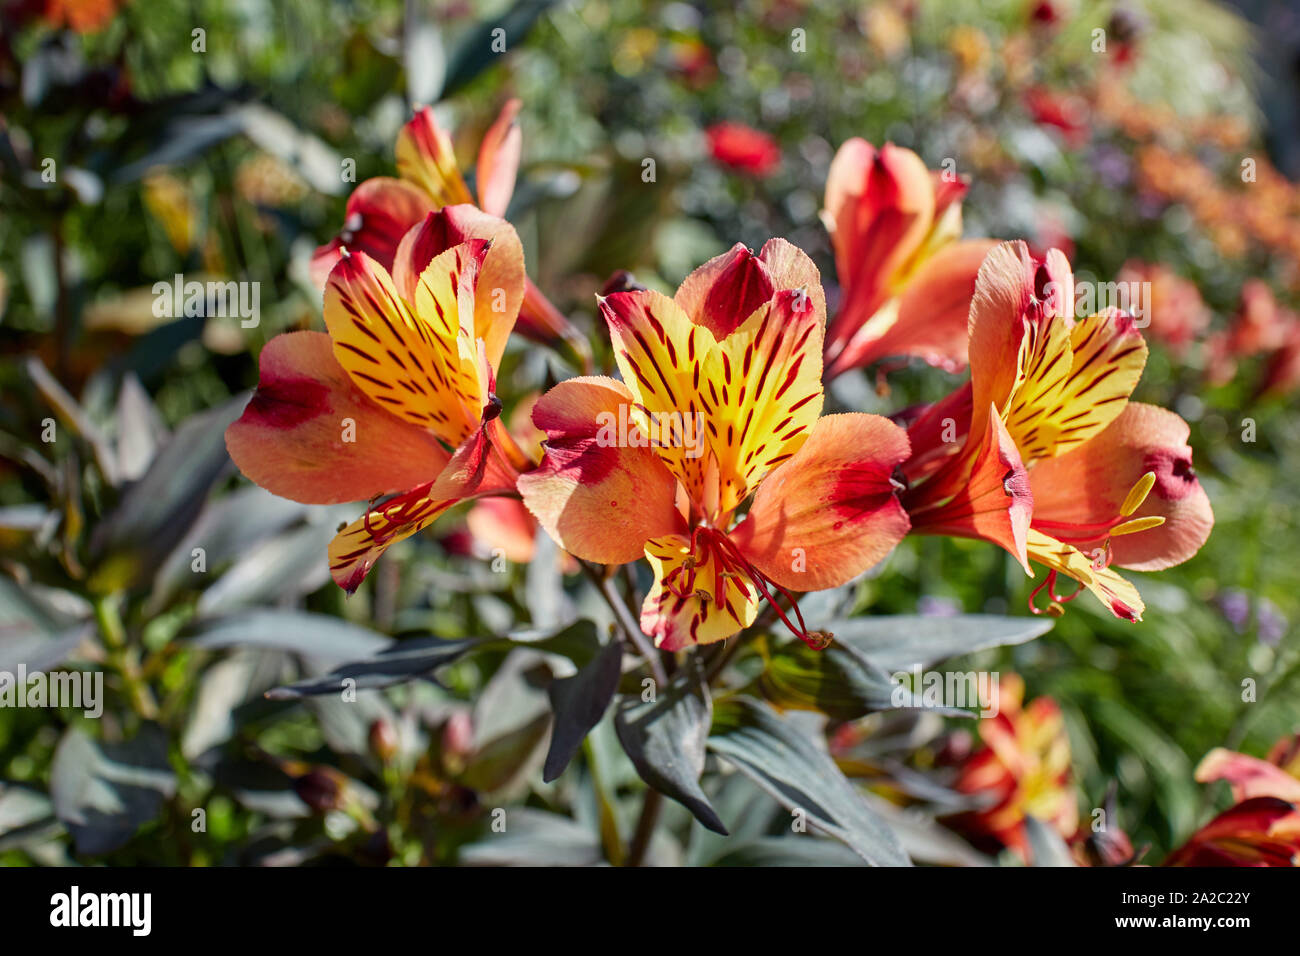 Stunningly vivid and colourful Peruvian lily (Alstroemeria) flowers on a sunny day. Stock Photo